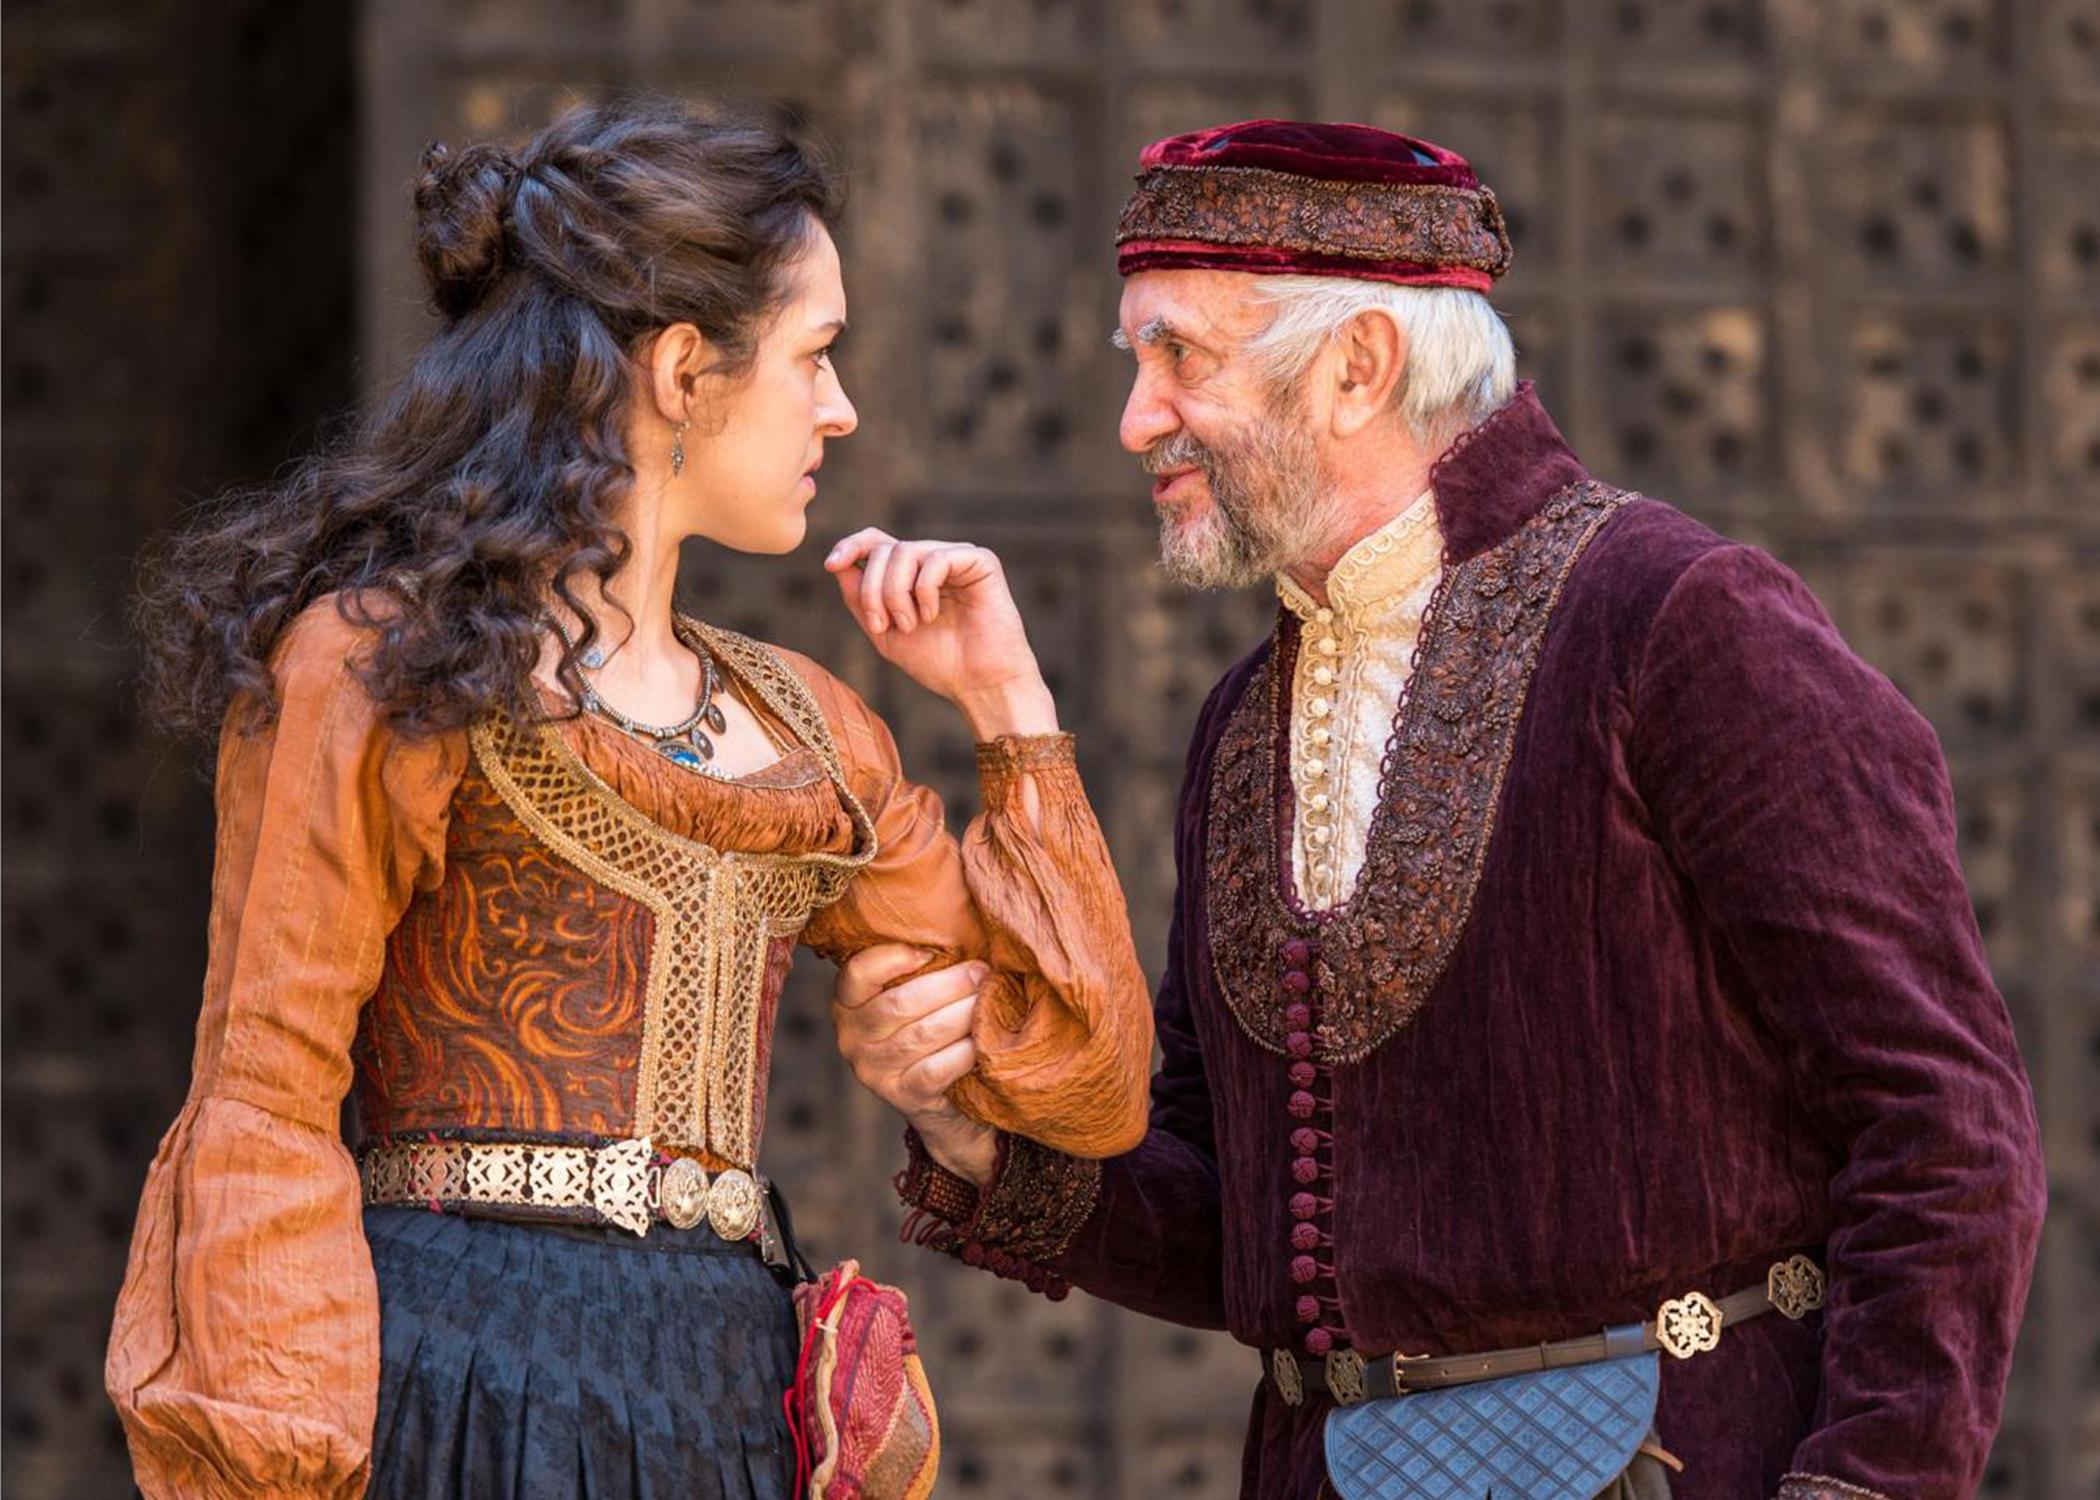 Phoebe Pryce and Jonathan Pryce in the Shakespeare’s Globe production of “The Merchant of Venice,” directed by Jonathan Munby, presented at Chicago Shakespeare Theater. (Marc Brenner / Chicago Shakespeare Theater)